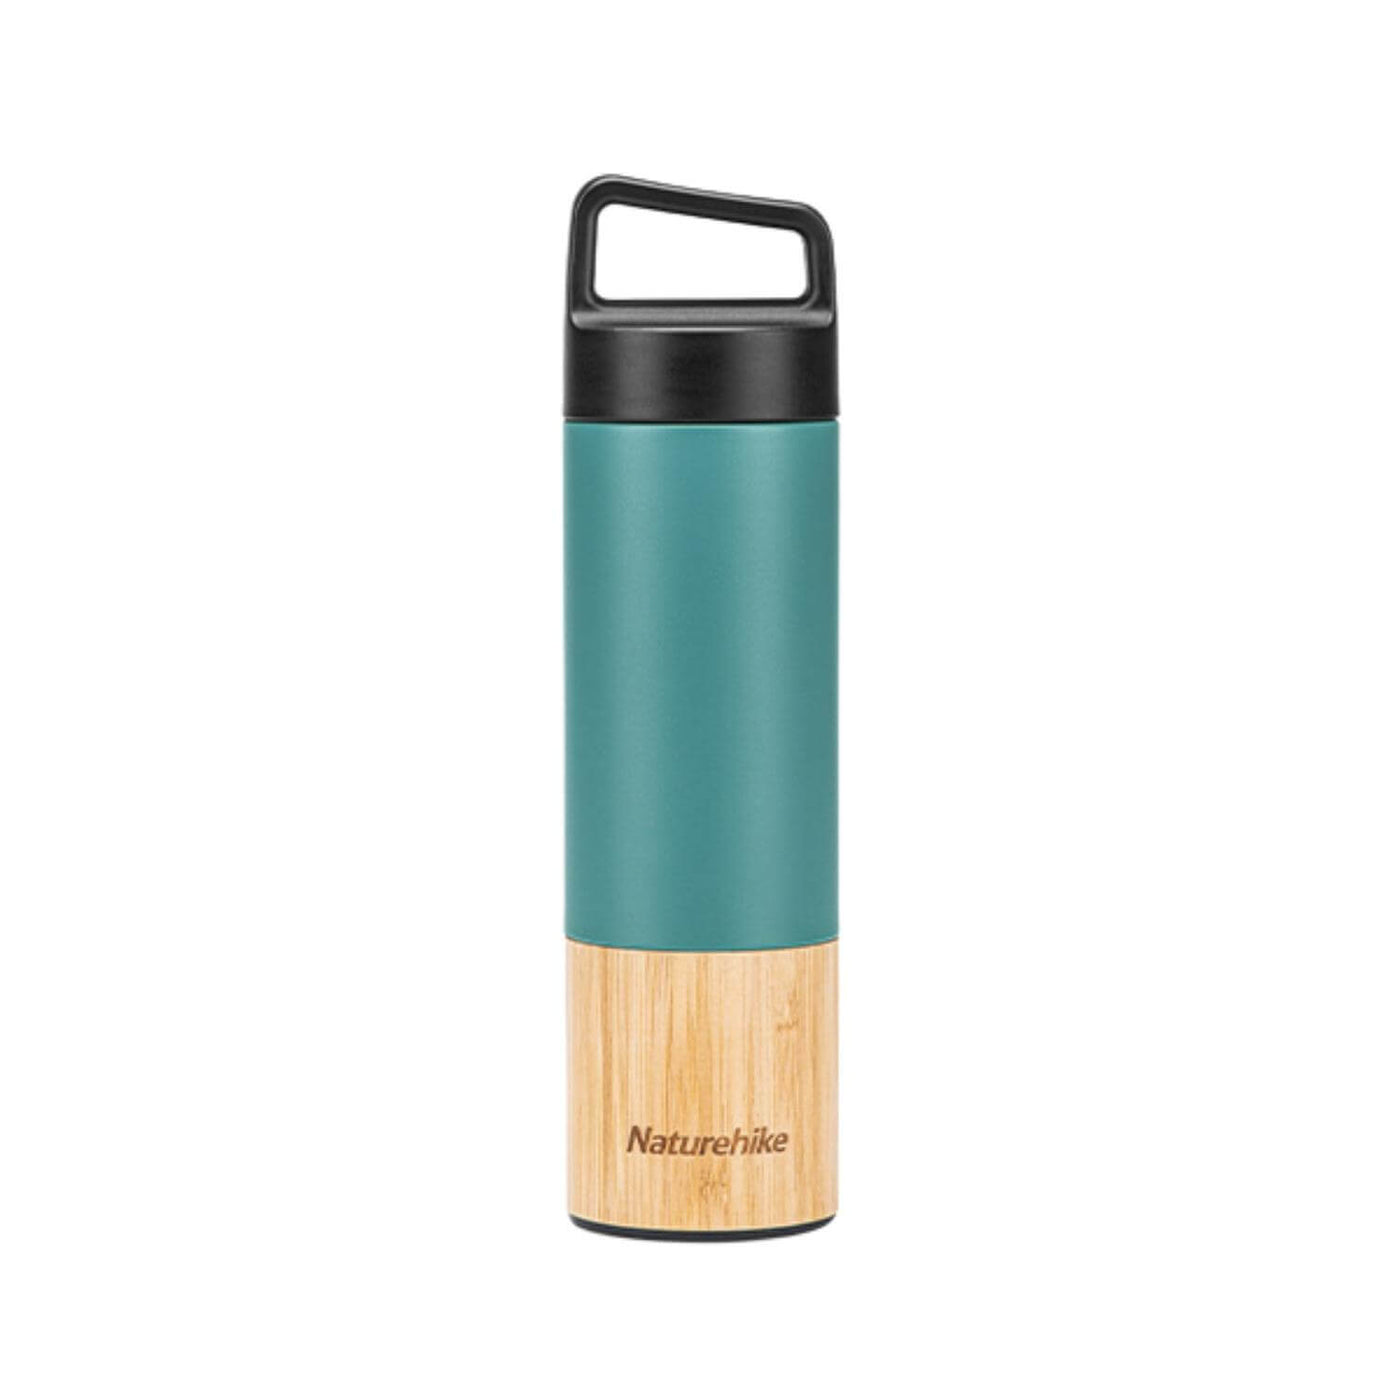 Bamboo bottle with tea compartment